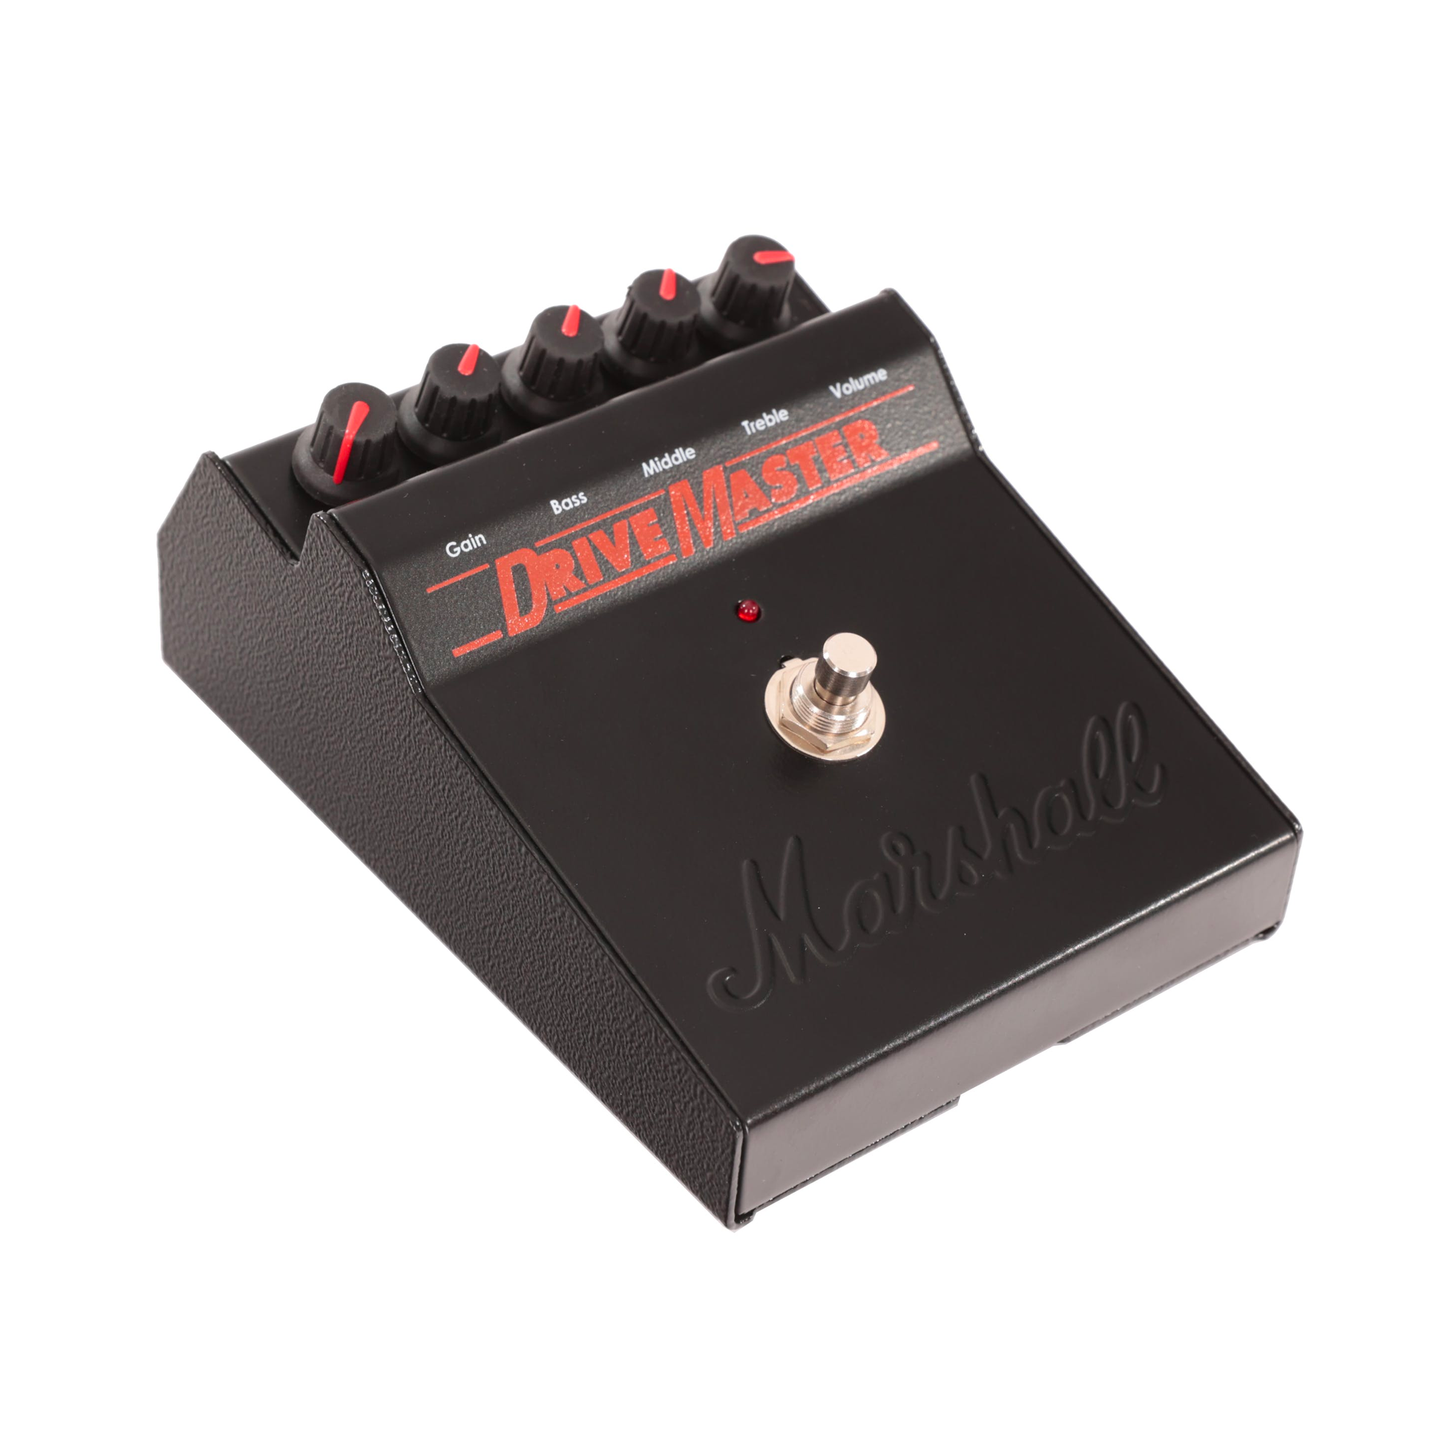 Marshall - REISSUE DRIVE MASTER PEDAL